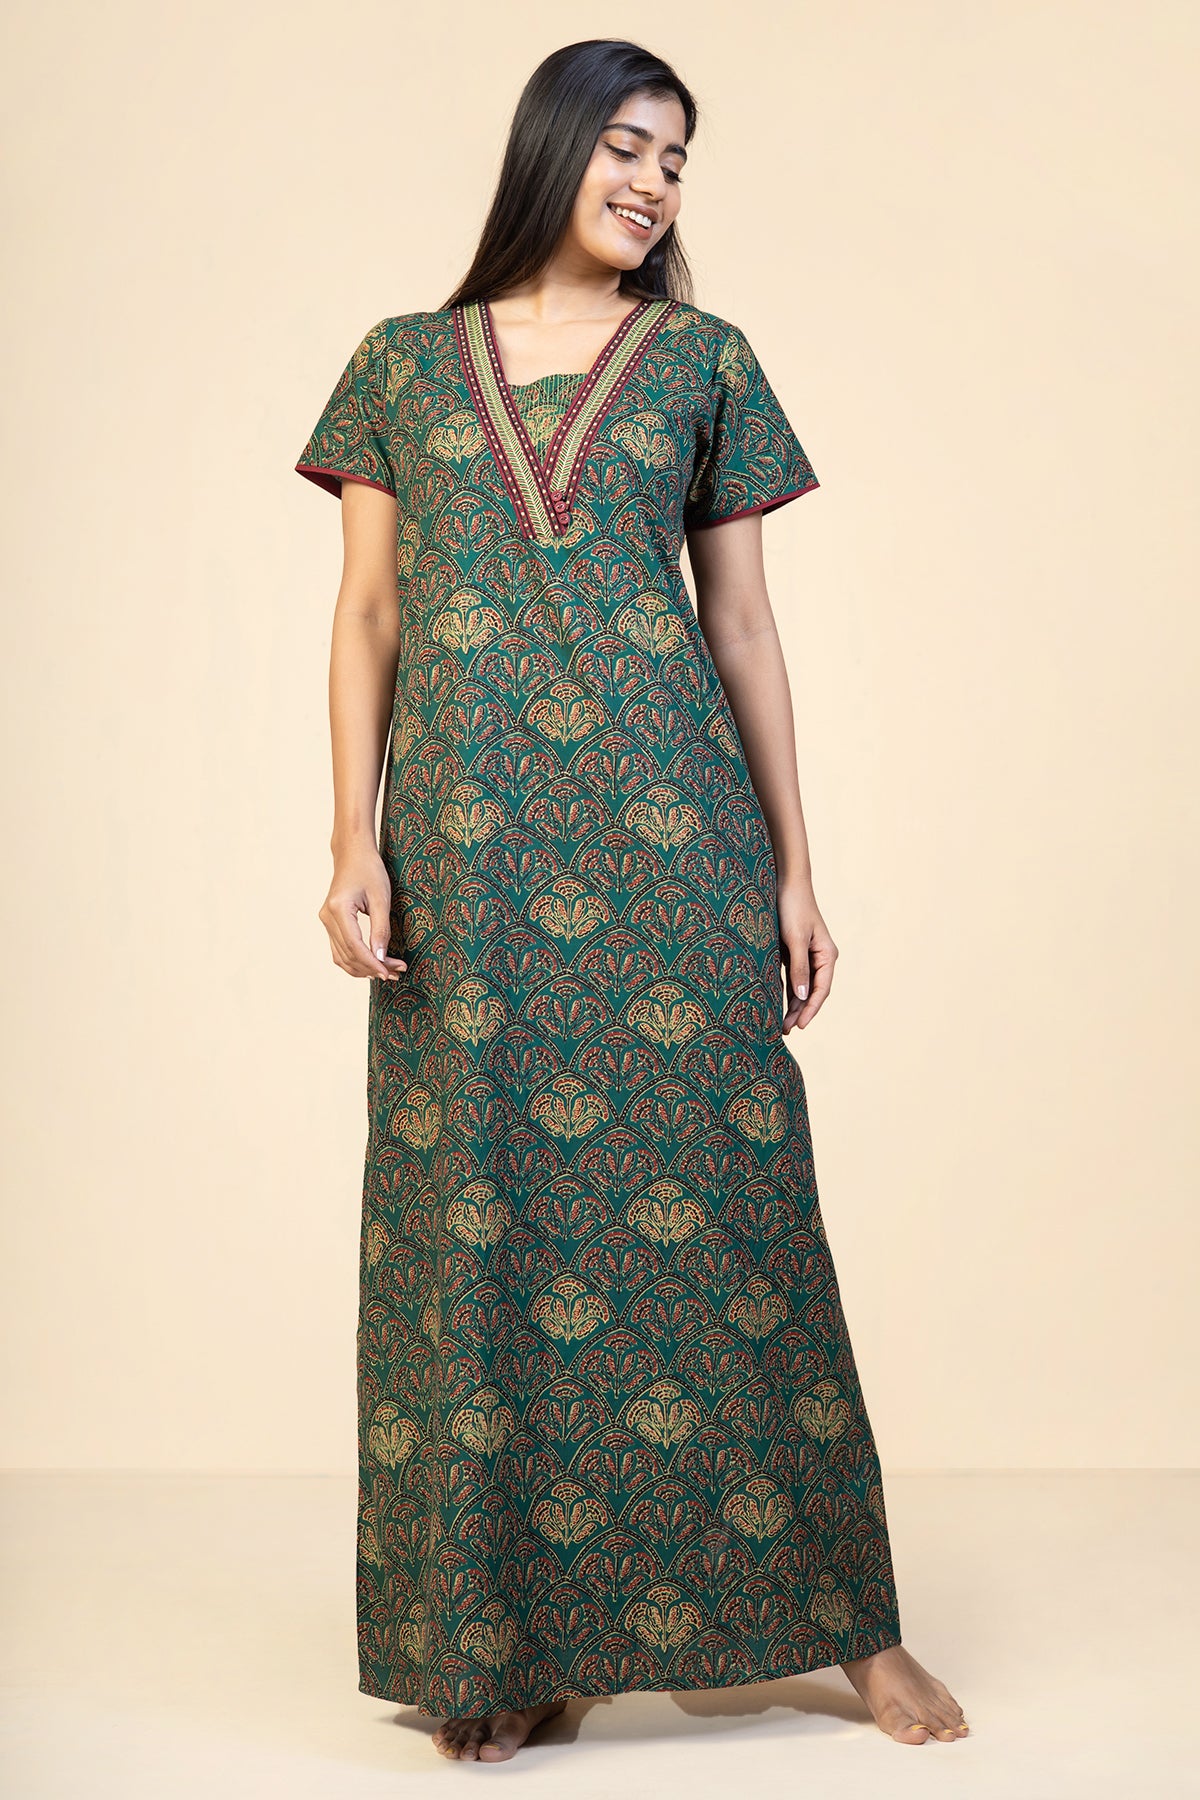 All Over Ajrak Printed With Yoke Embroidered Nighty - Green